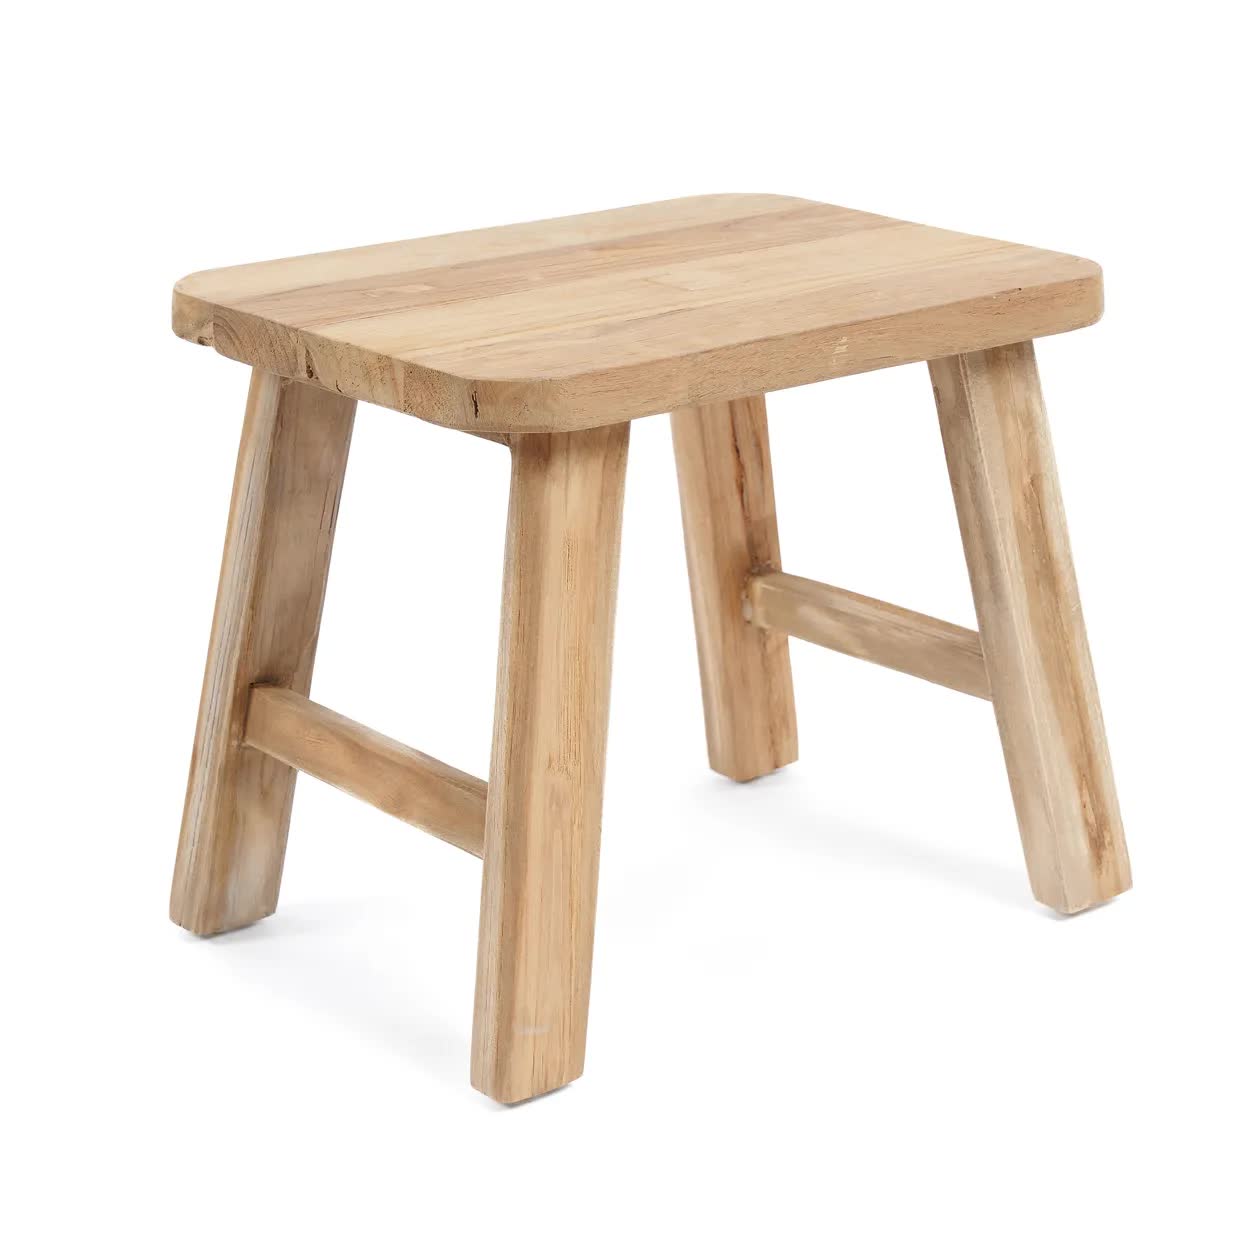 The QUINCY Stool - Natural